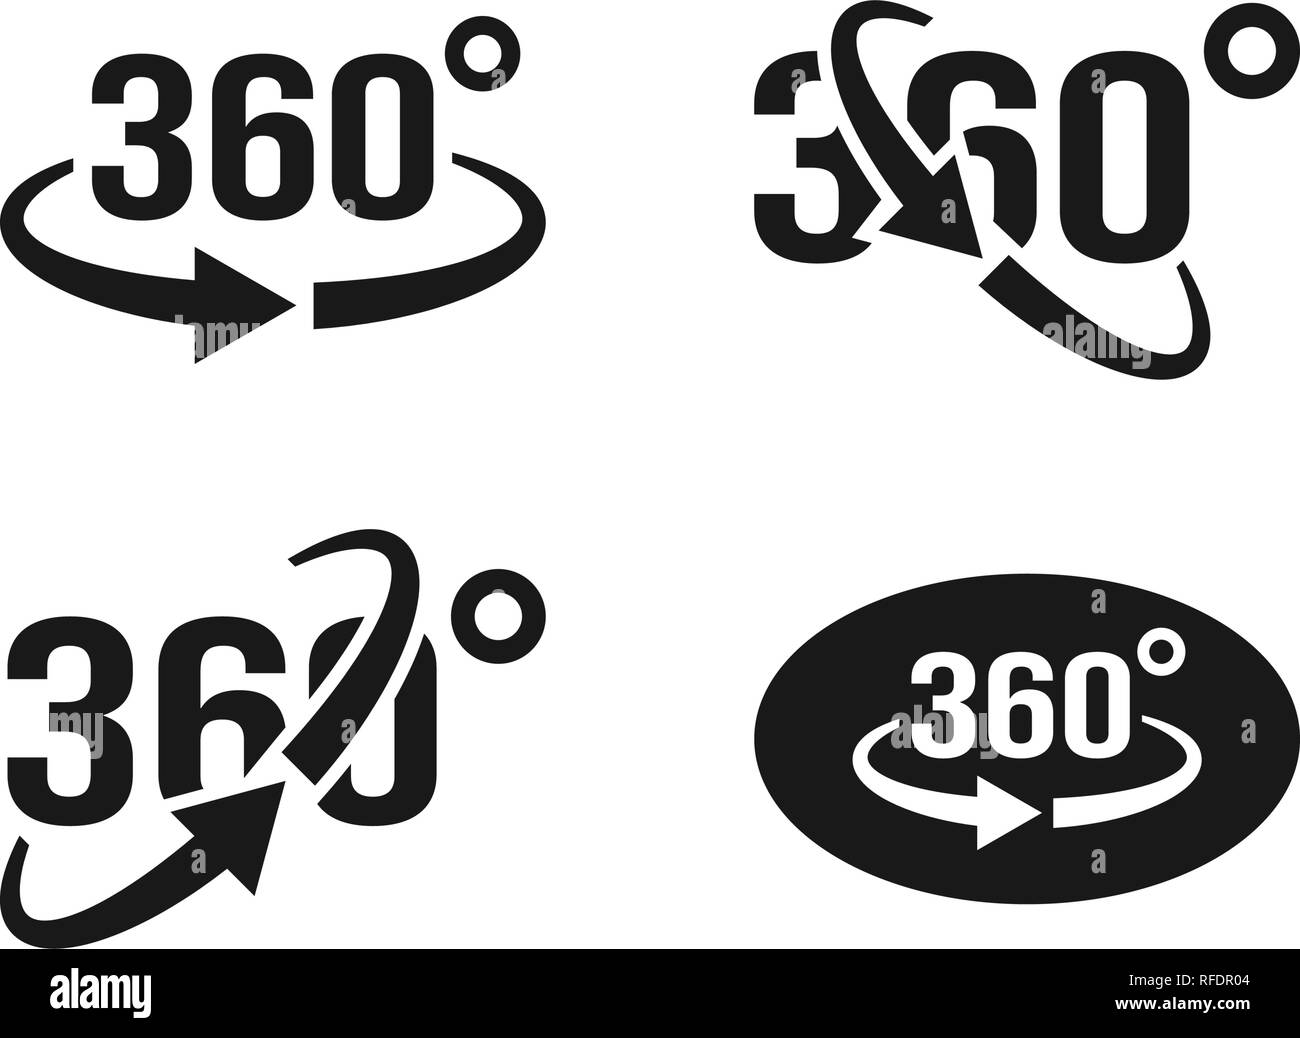 360 view icon graphic design template vector isolated Stock Vector